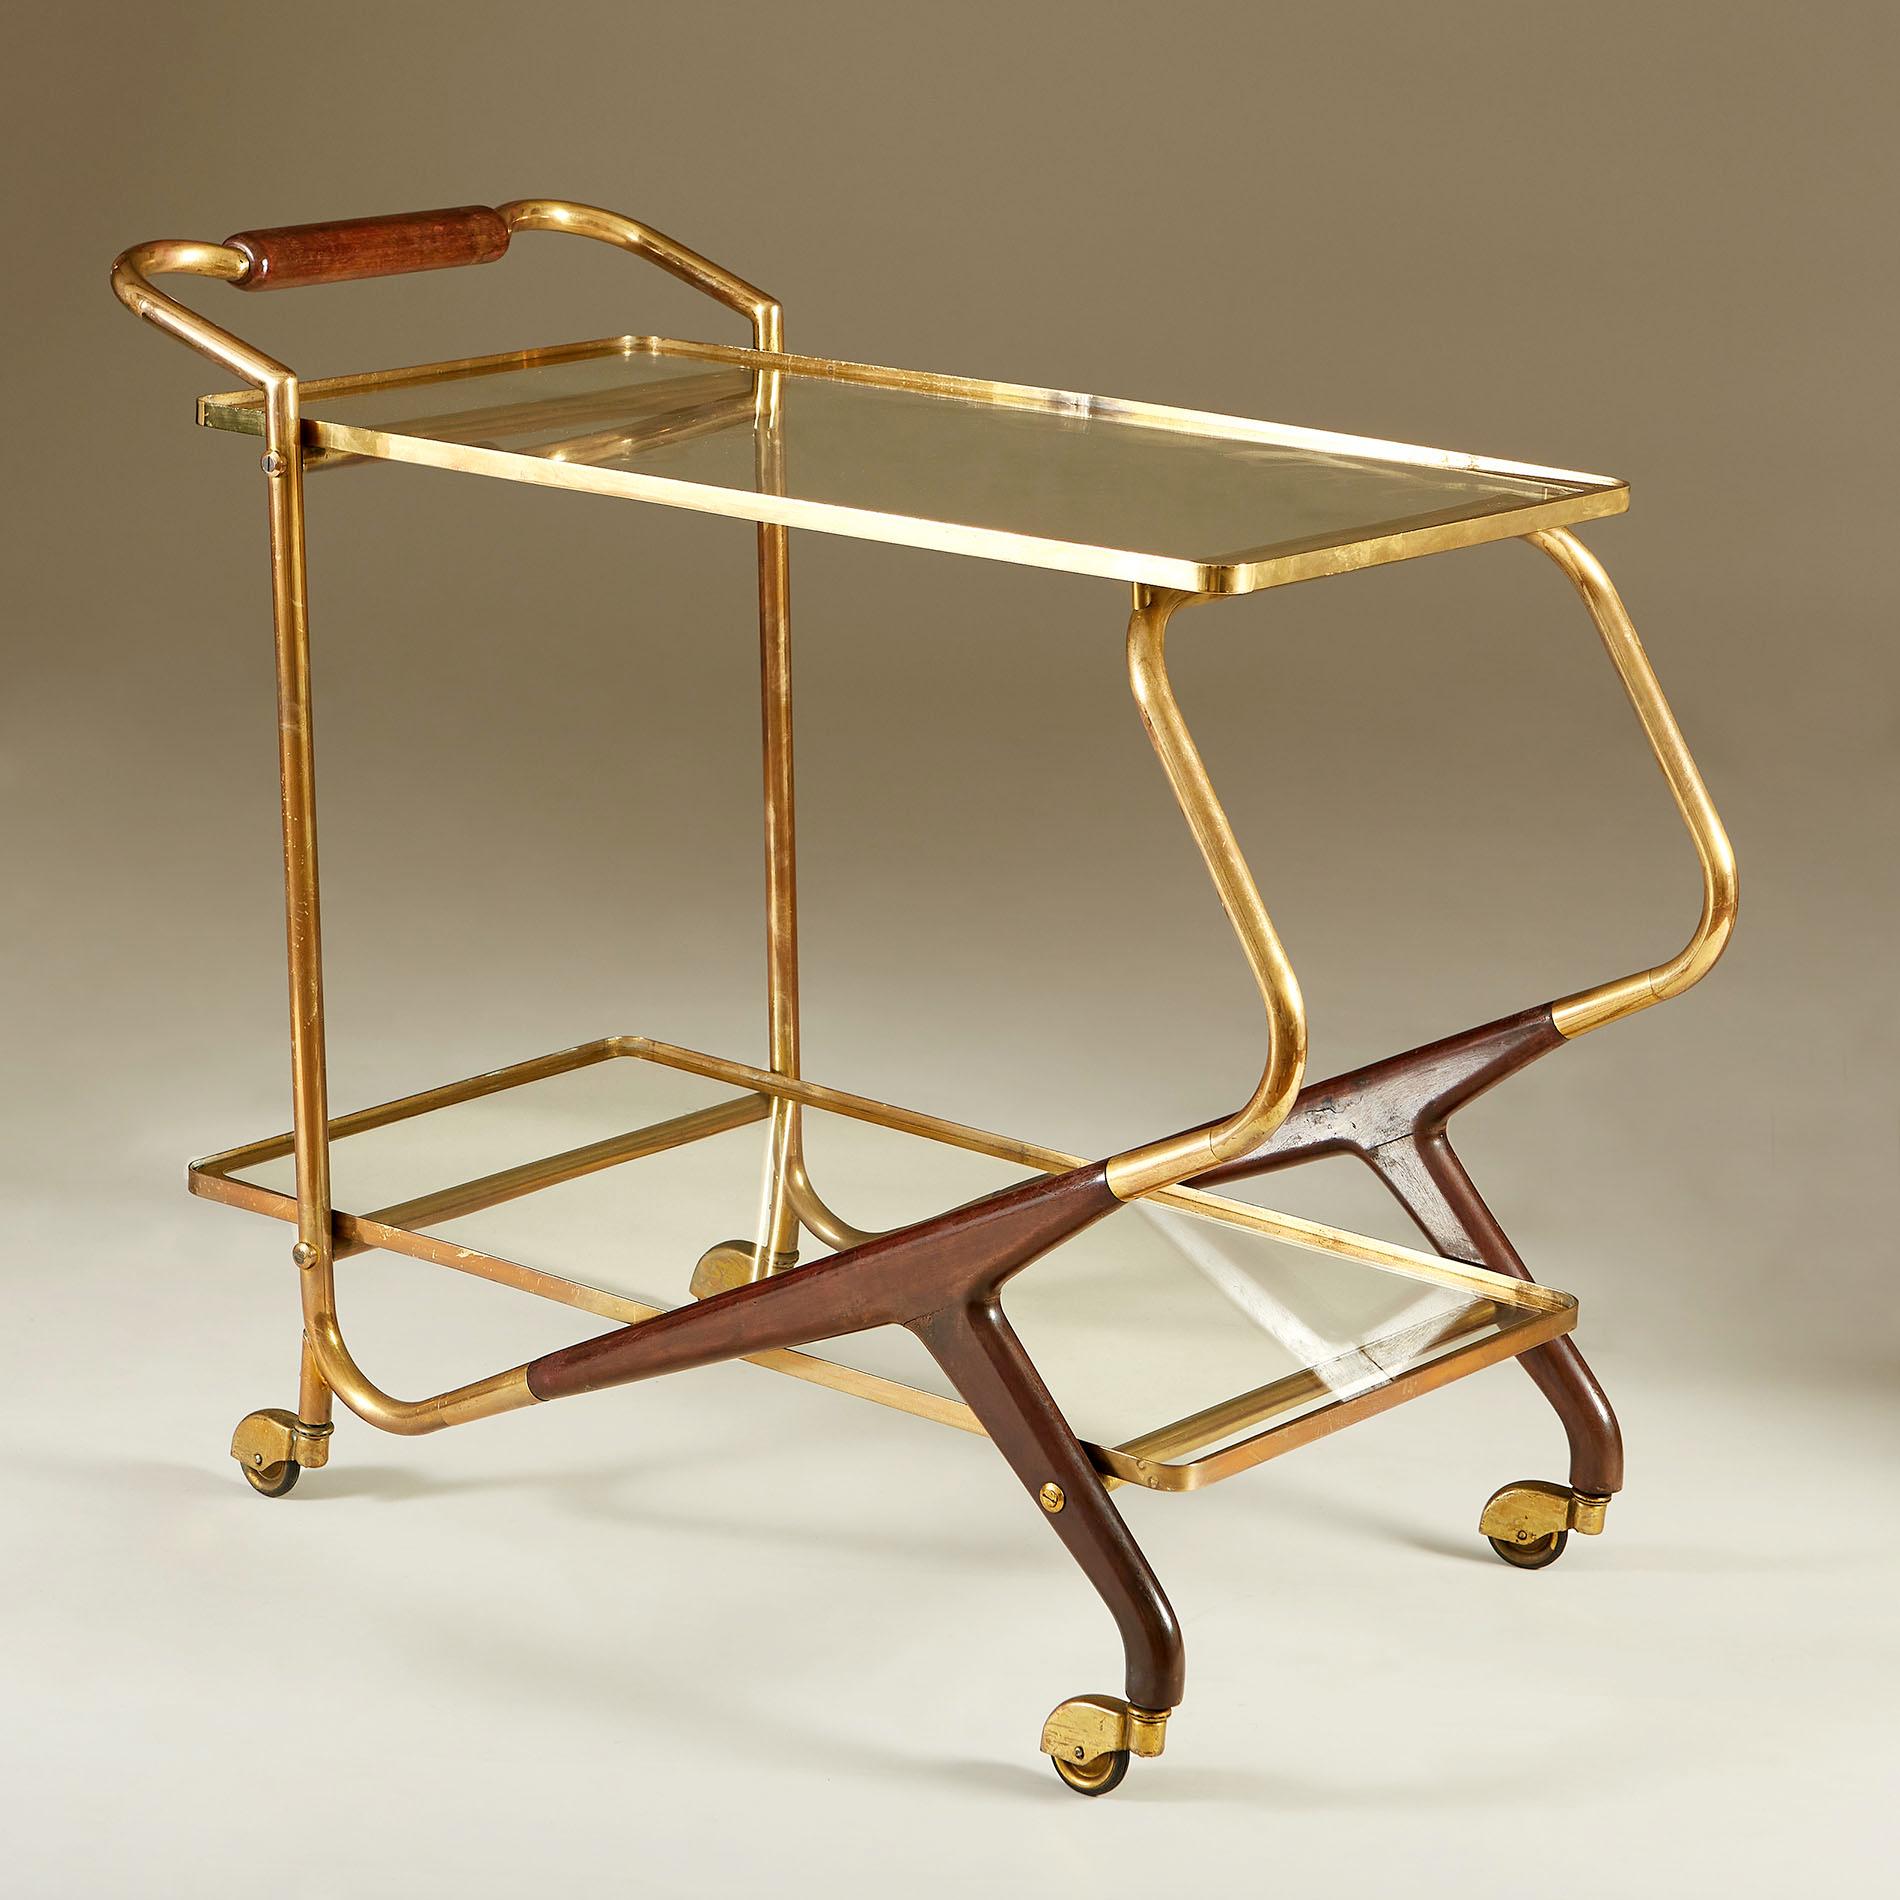 Well proportioned two-tiered drinks trolley with brass framed glass shelves and cherrywood and brass handle and legs. Sits on four brass covered castor wheels for ease of movement.